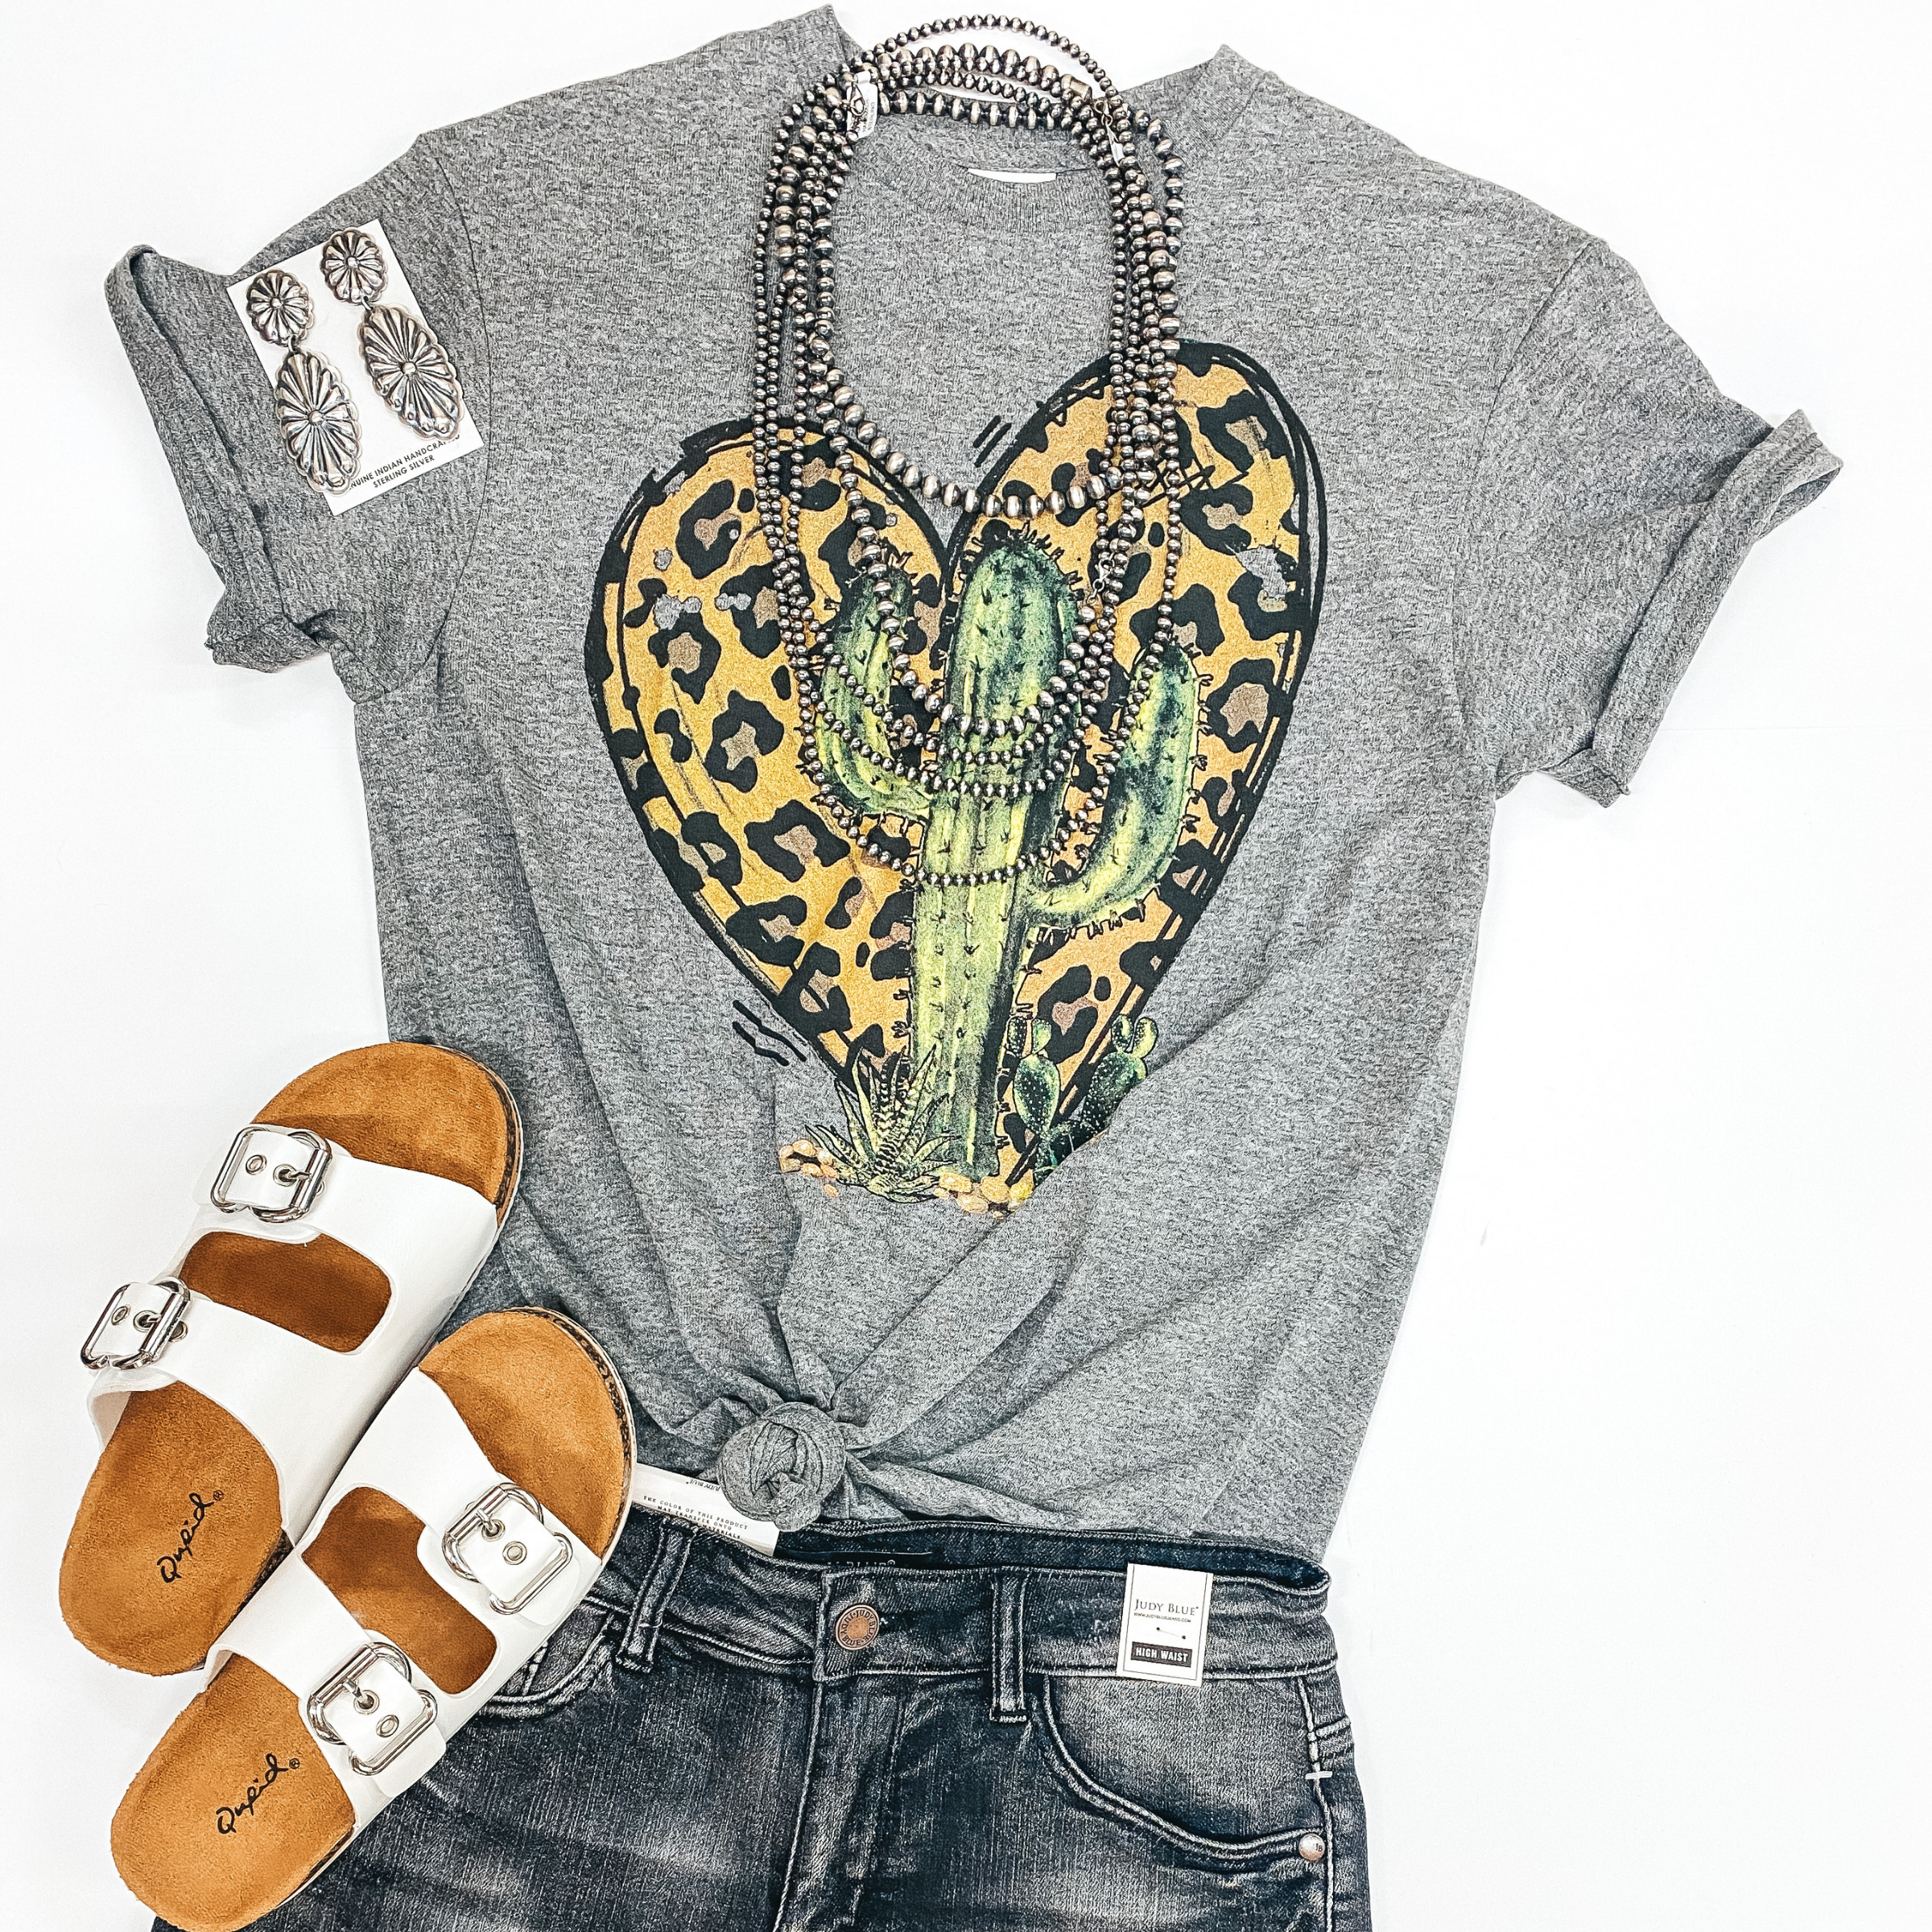 Desert Love Leopard Print Heart and Cactus Short Sleeve Graphic Tee in Grey - Giddy Up Glamour Boutique